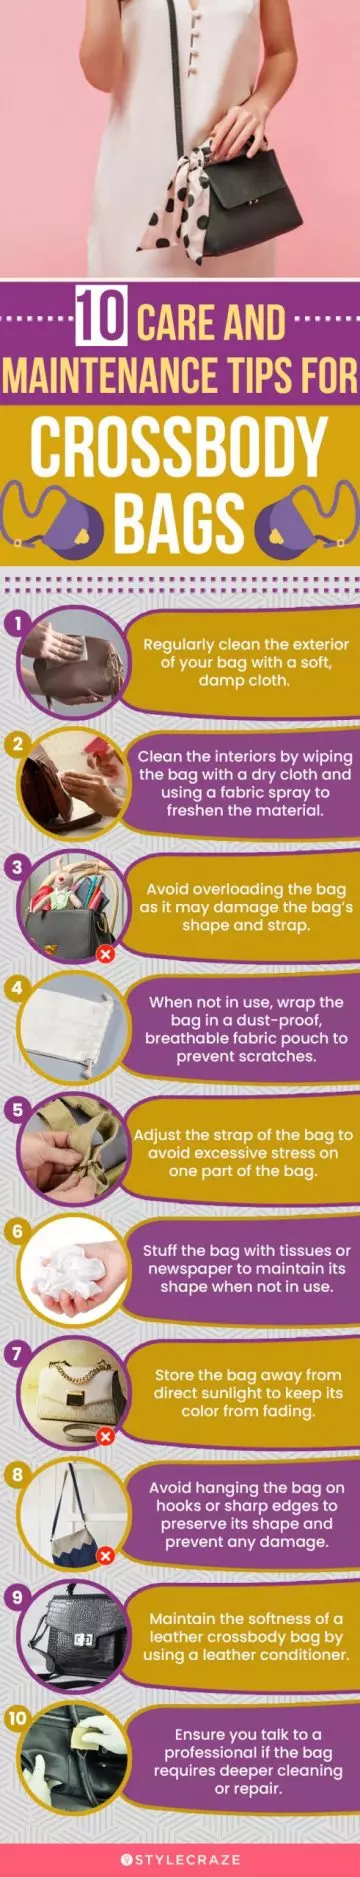 10 Care And Maintenance Tips For Crossbody Bags (infographic)